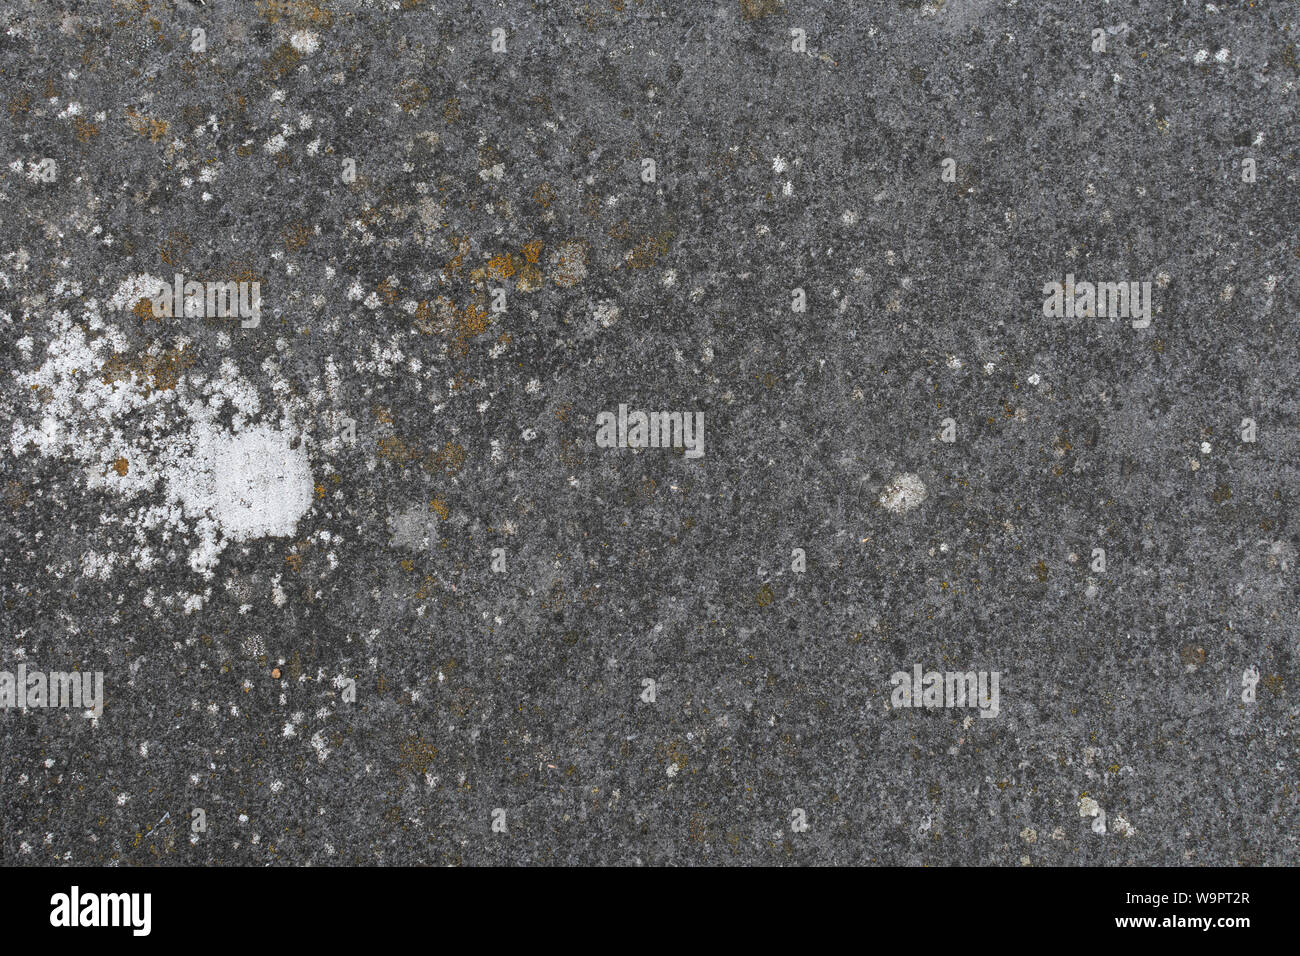 Concrete Floor With A Large White Patch Of Mold On It Stock Photo